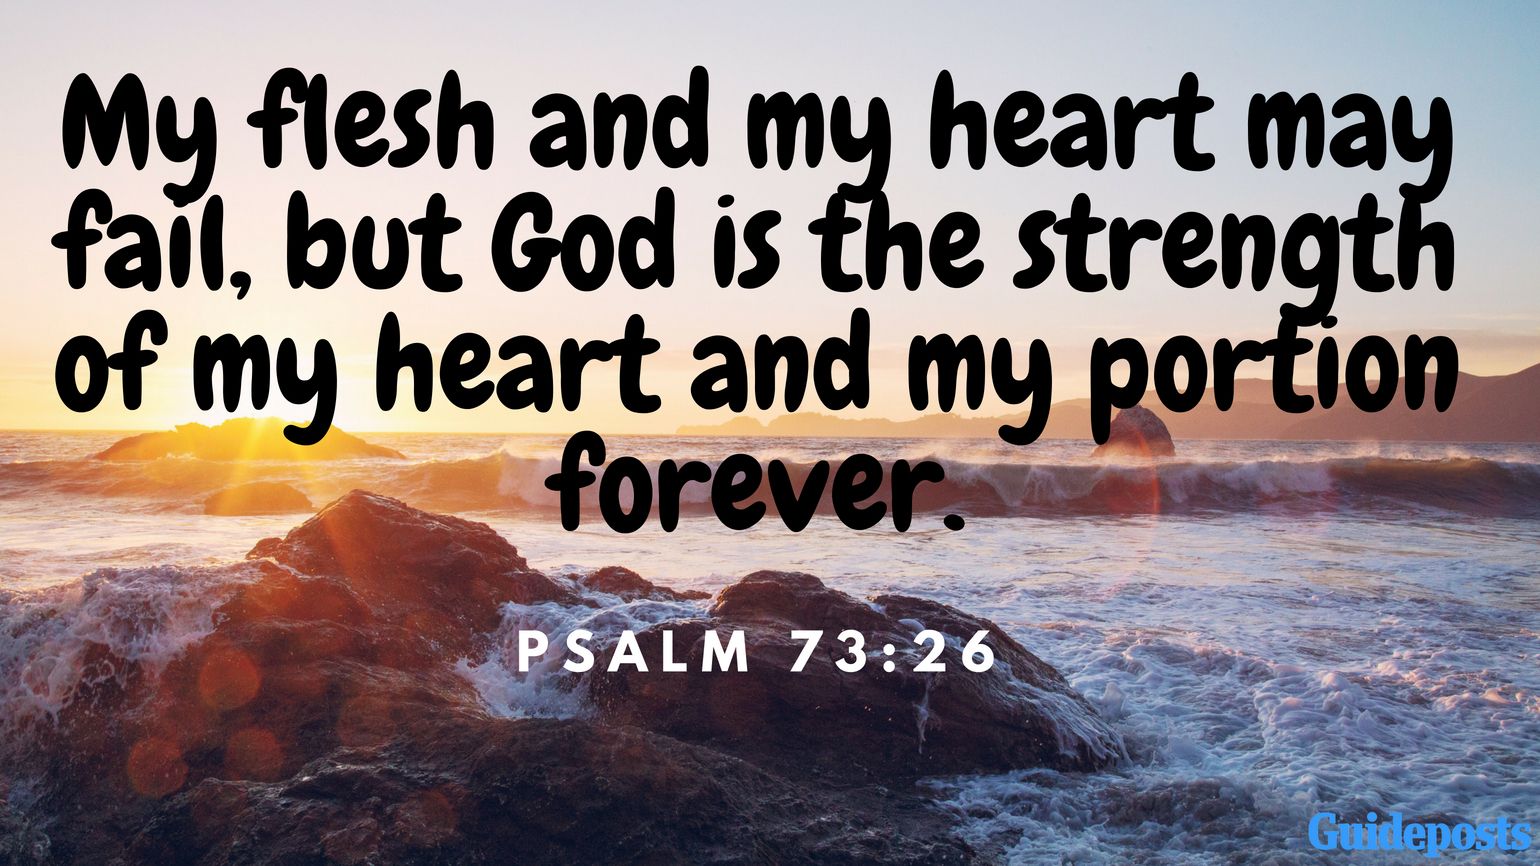 Bible Verse for Coping With Grief: My flesh and my heart may fail, but God is the strength of my heart and my portion forever. Psalm 73:26 Better Living Life Advice